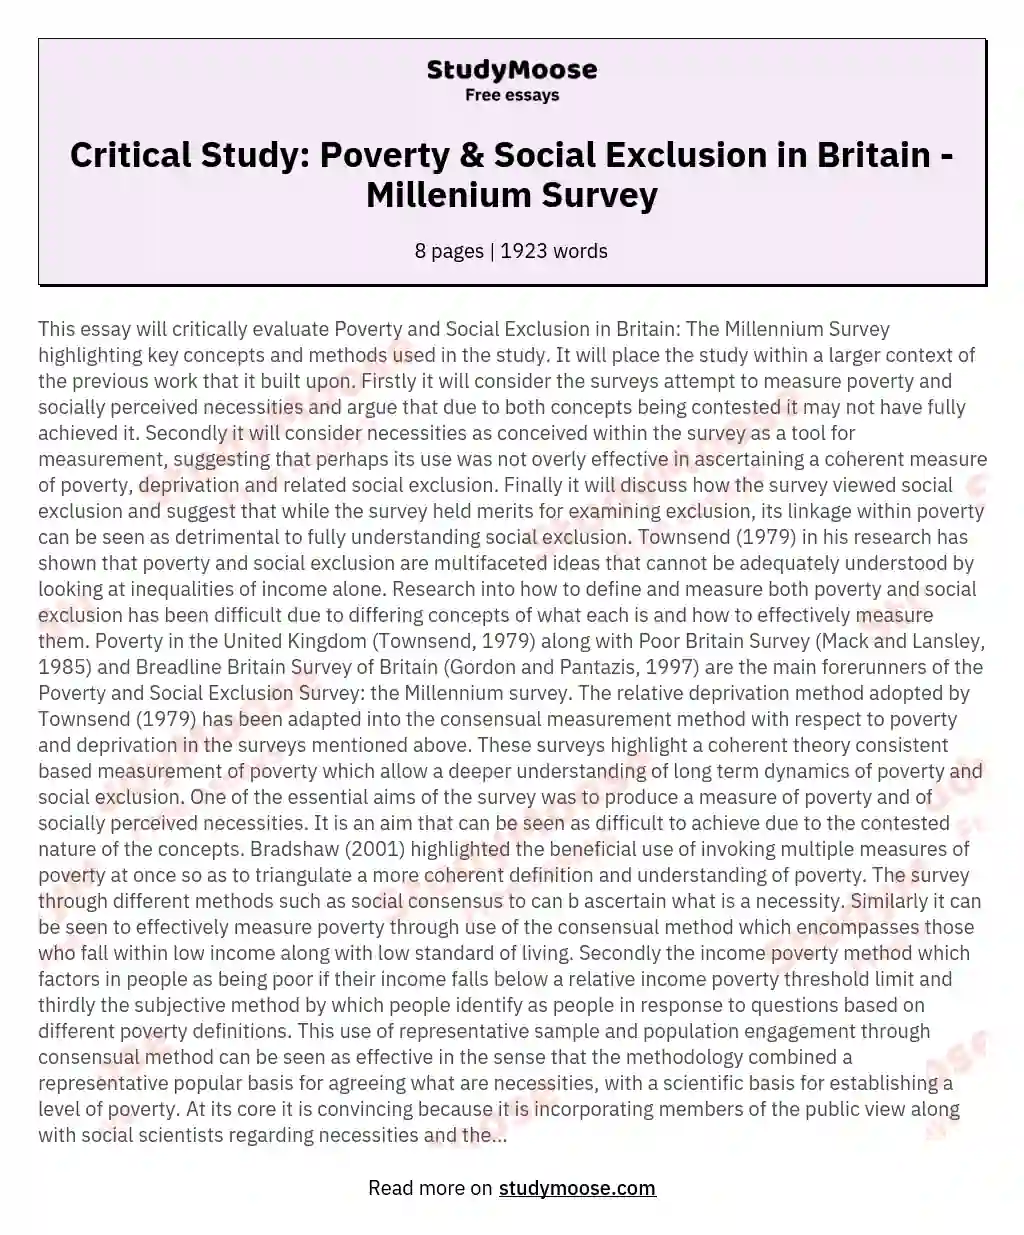 A Critical Evaluation of the Study Poverty and Social Exclusion in Britain: The Millenium Survey